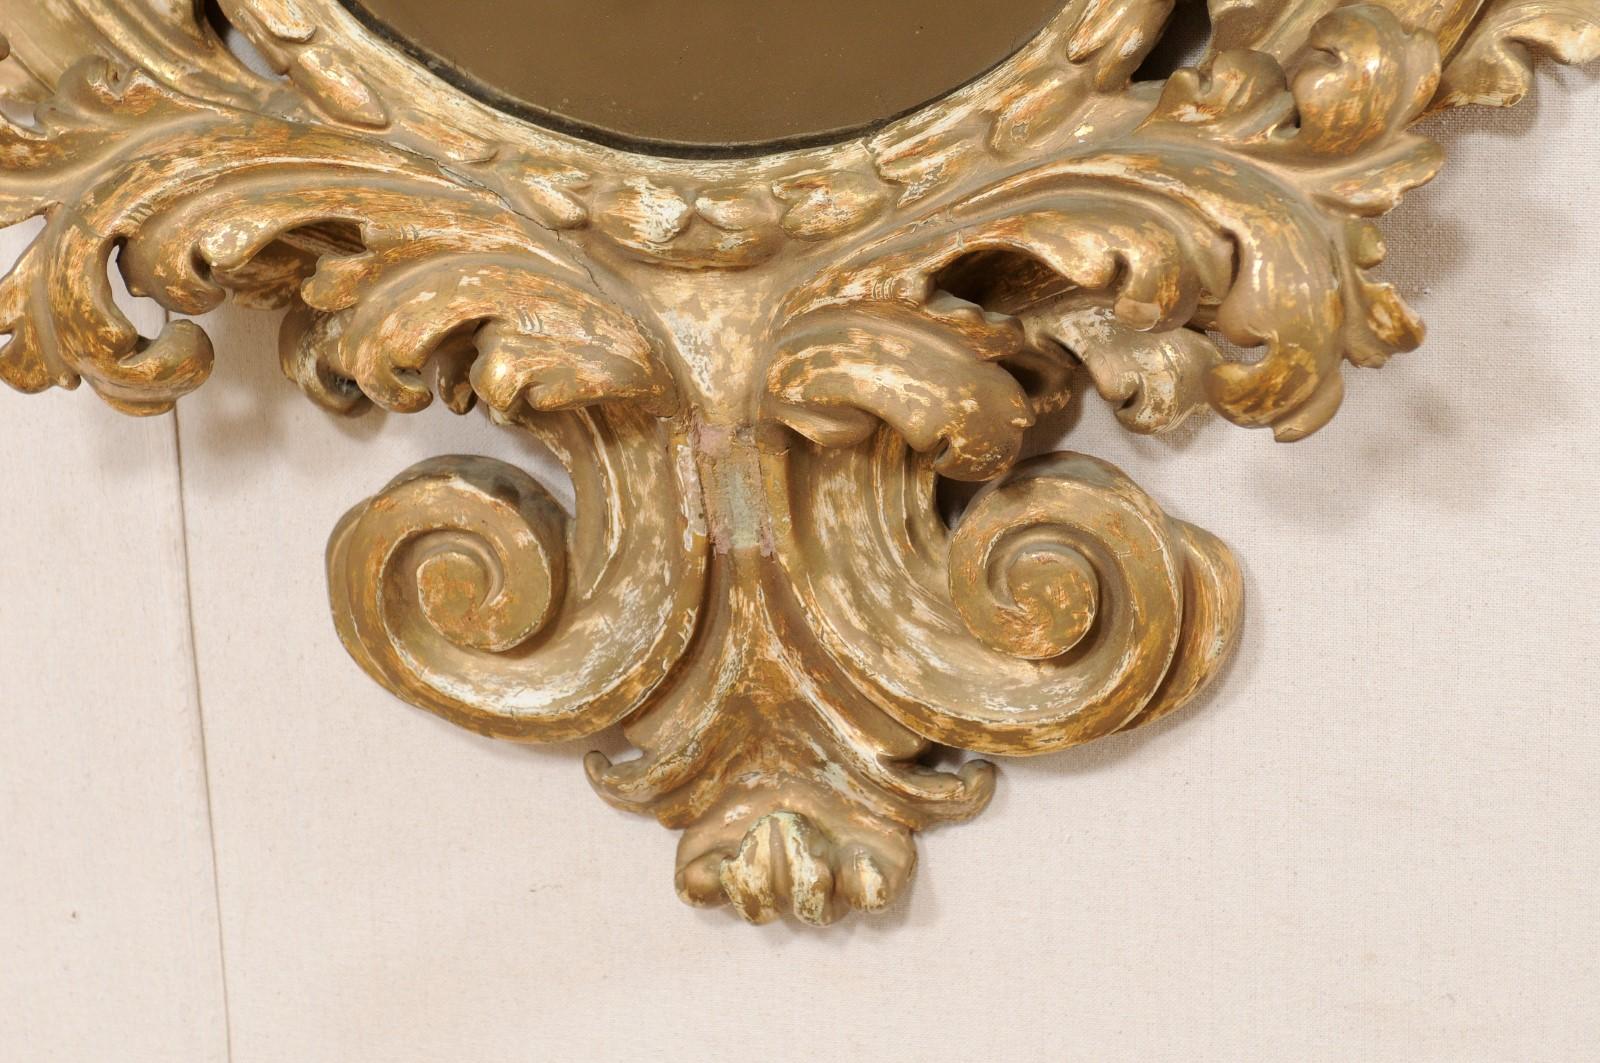 Italian Ornate Acanthus-Carved Mirror w/Oblong, Oval-Shaped Glass, 18th/19th C. For Sale 4